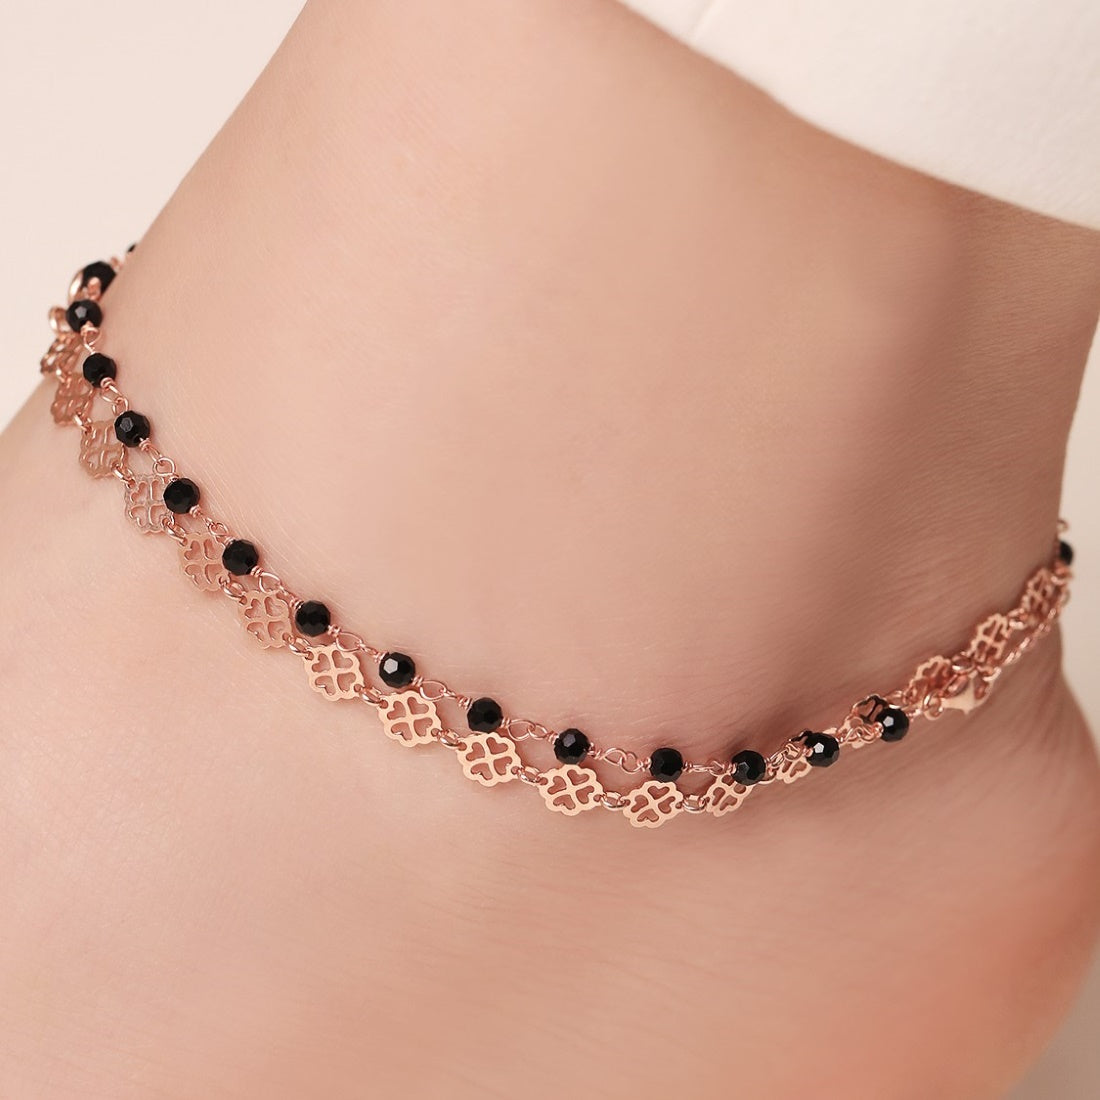 Heartfelt Harmony 925 Sterling Silver Anklet with Black Beads